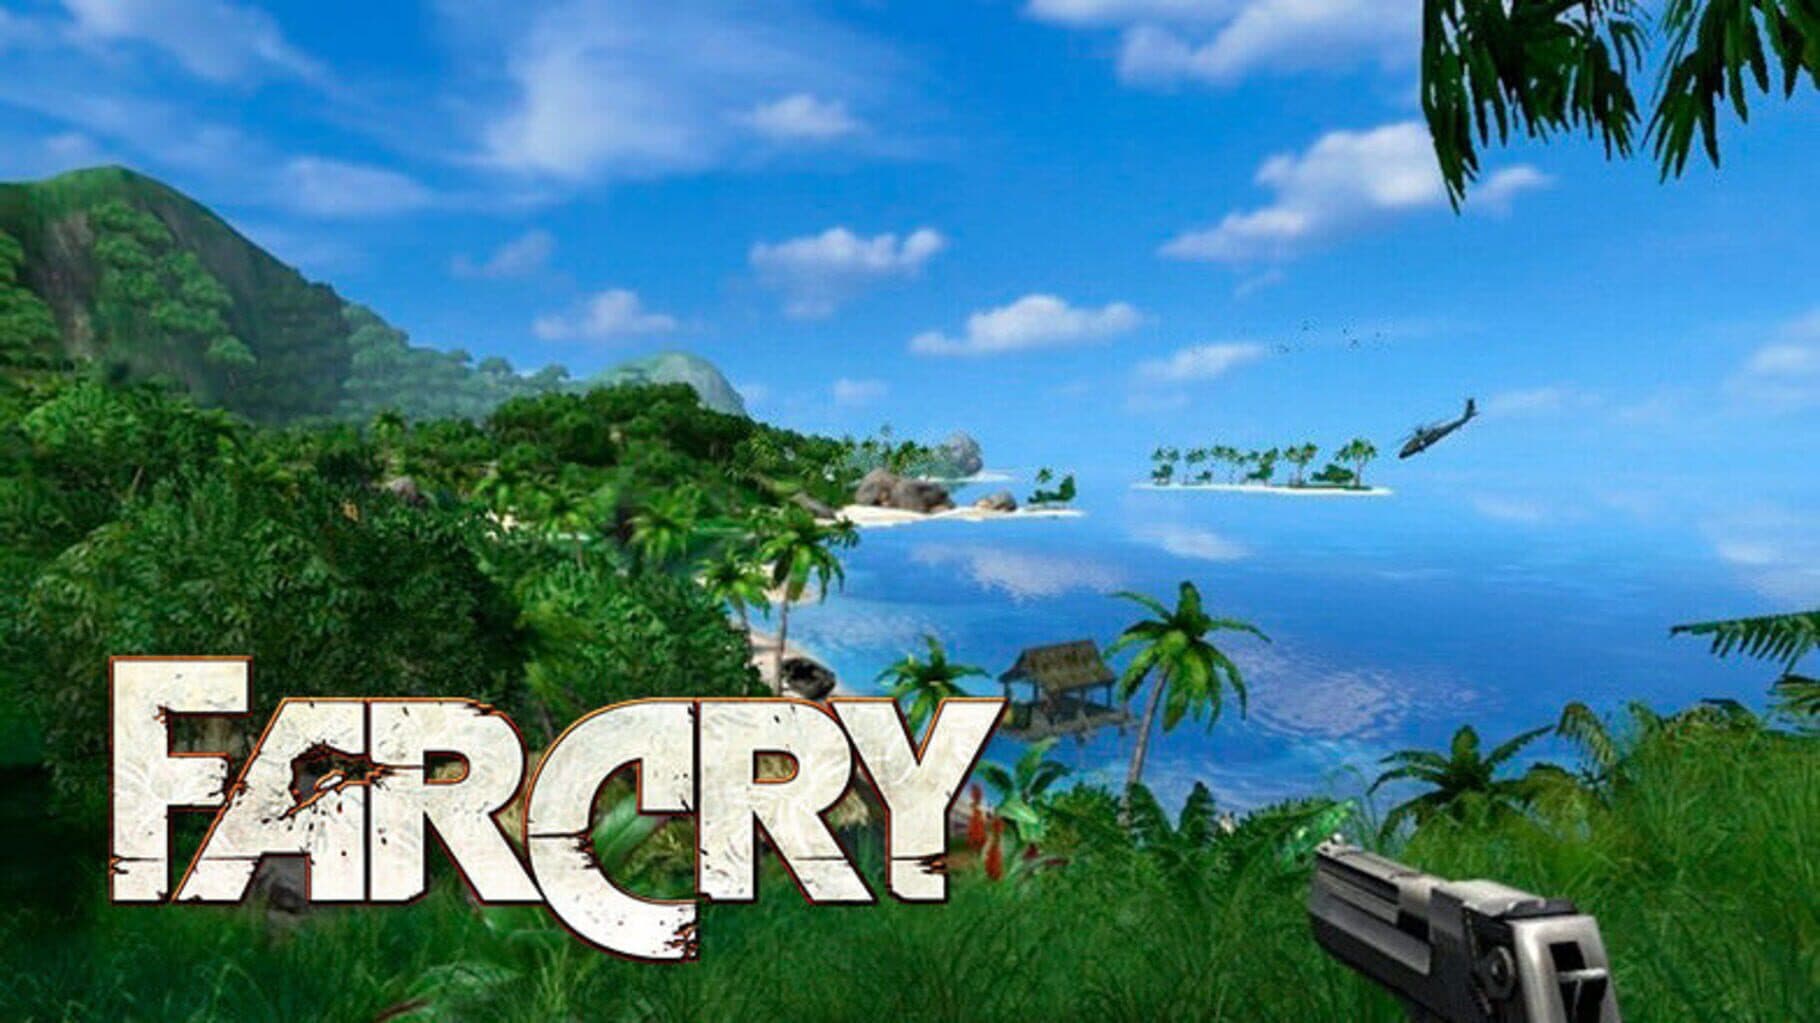 Far Cry: Gold Pack Image